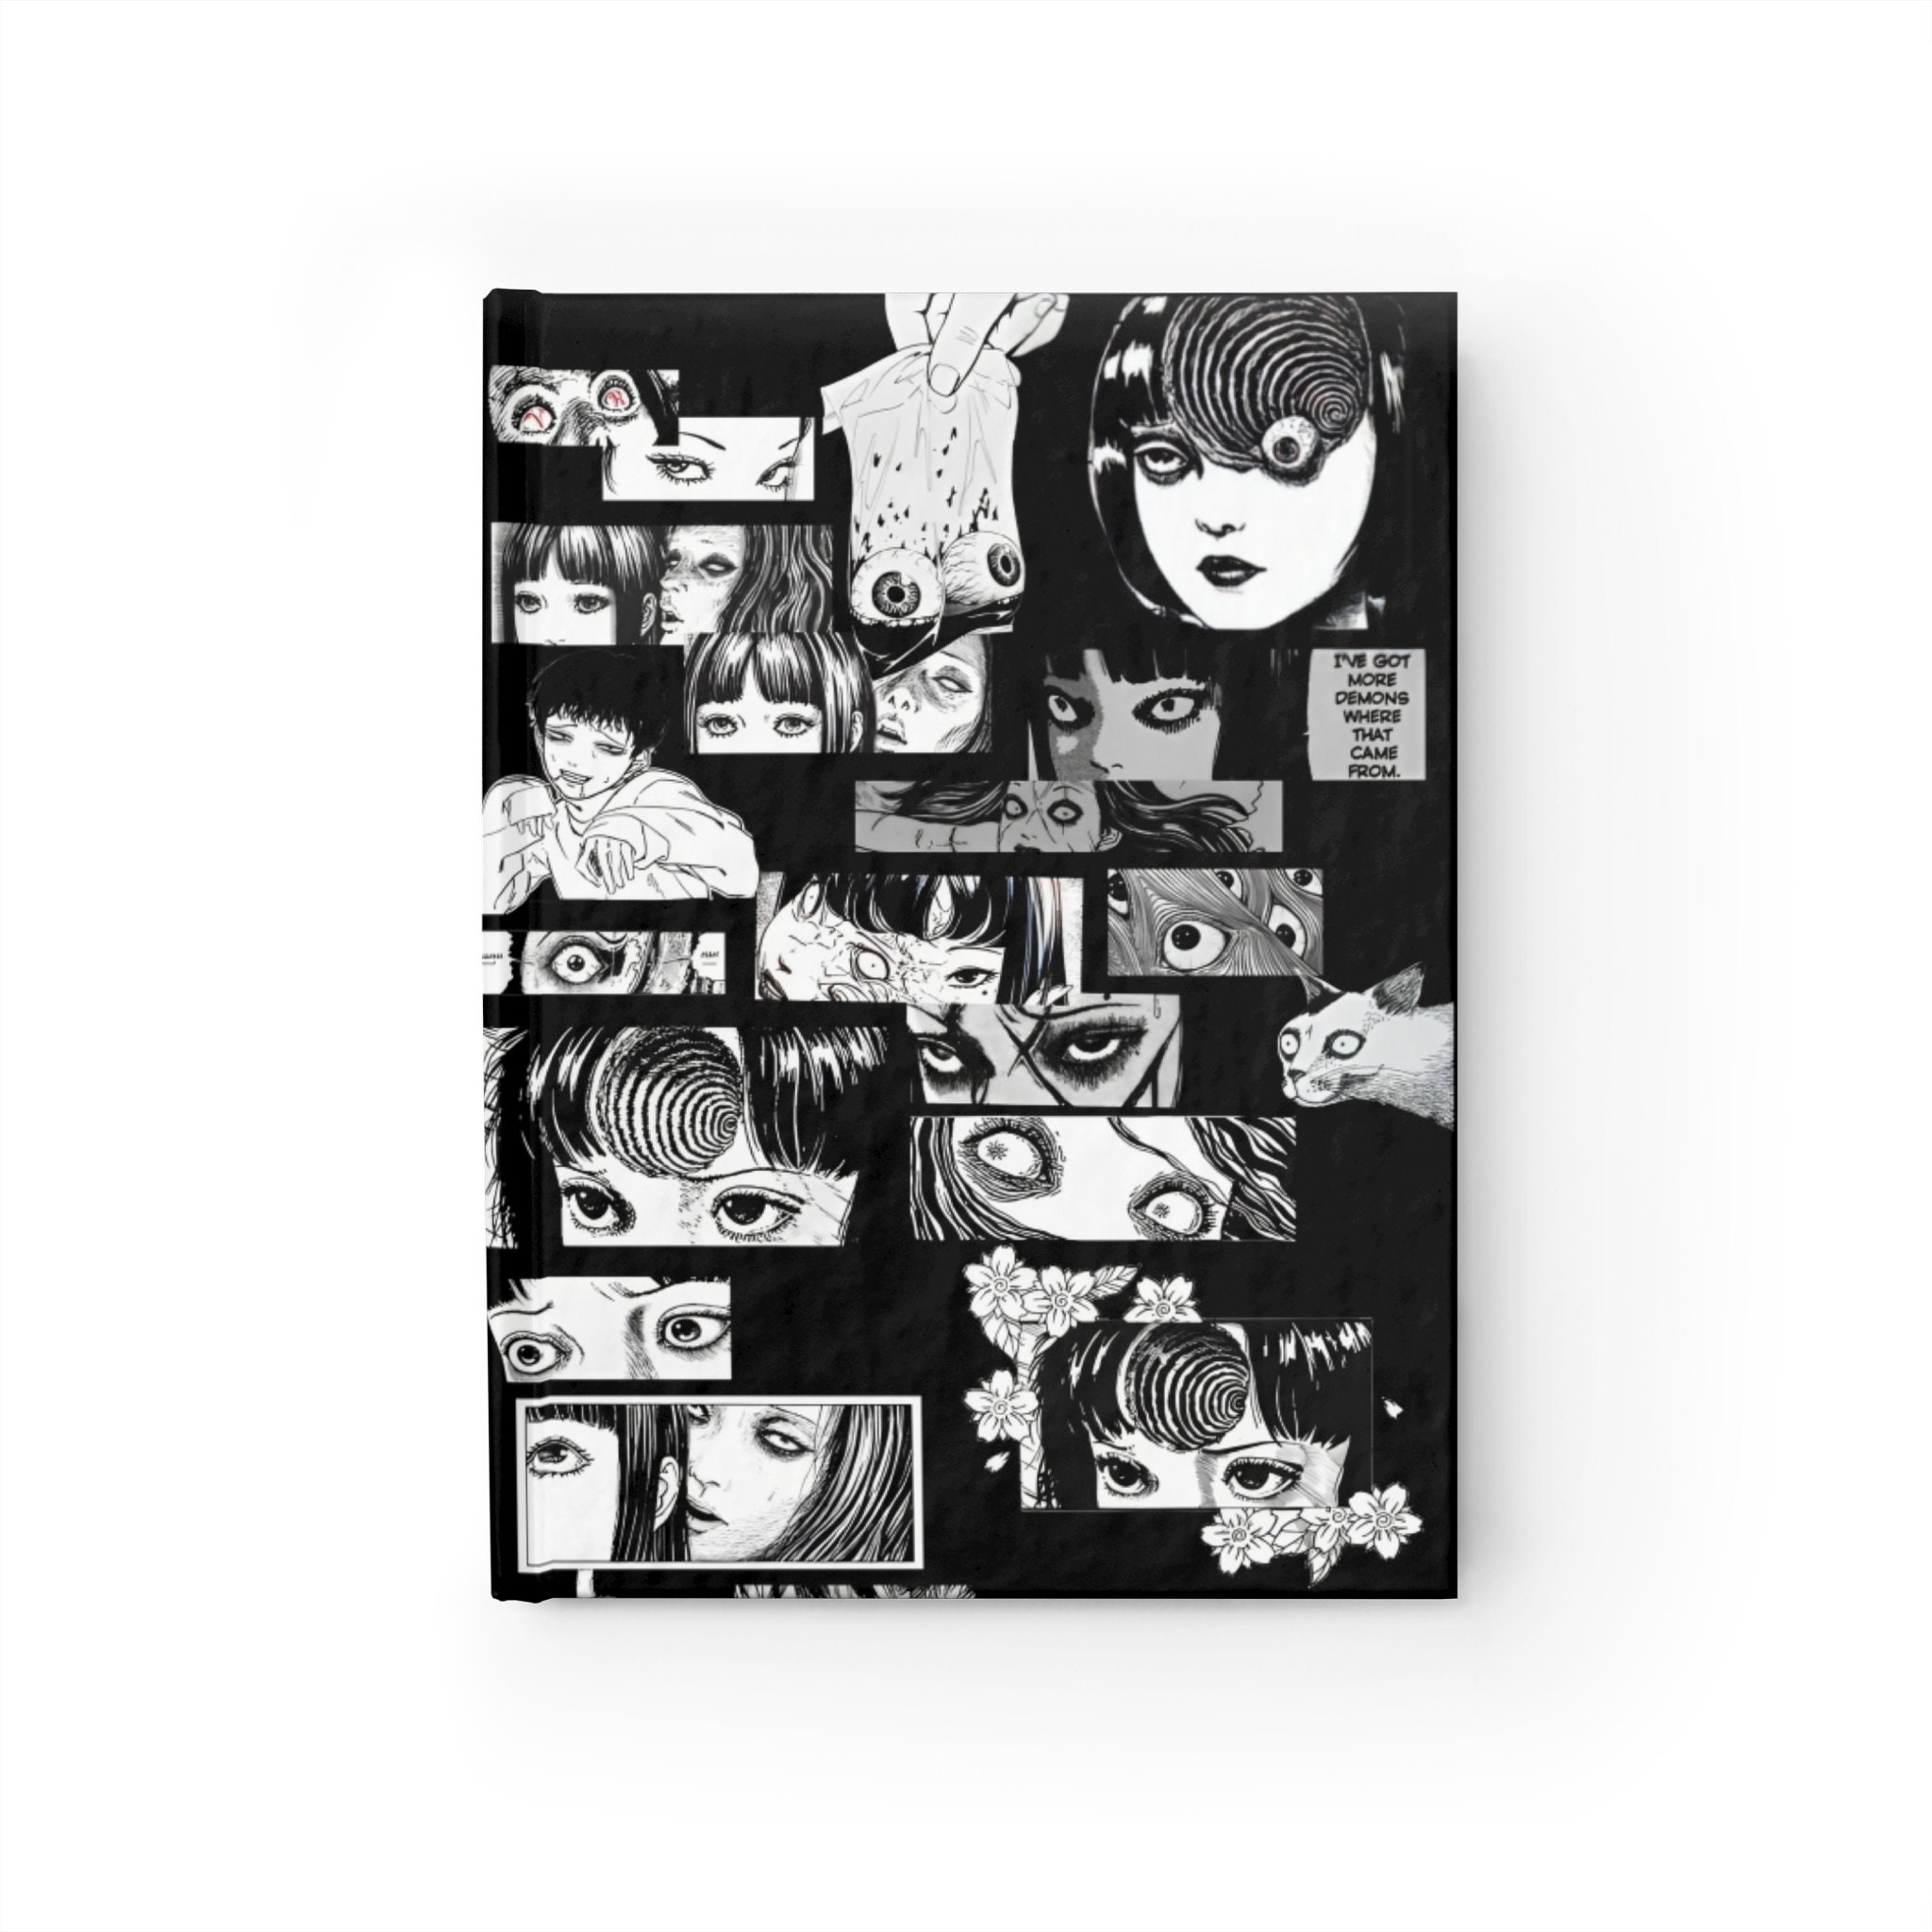 Anime Sketchbook: Cute Manga Anime Sketch Book for drawing and sketching - Anime  Drawing Book - Blank Drawing Paper - Anime Art Supplies - Otaku &  8.5 x  11 Inches, 120+ Pages, Otaku Notebook by Laurie Bella